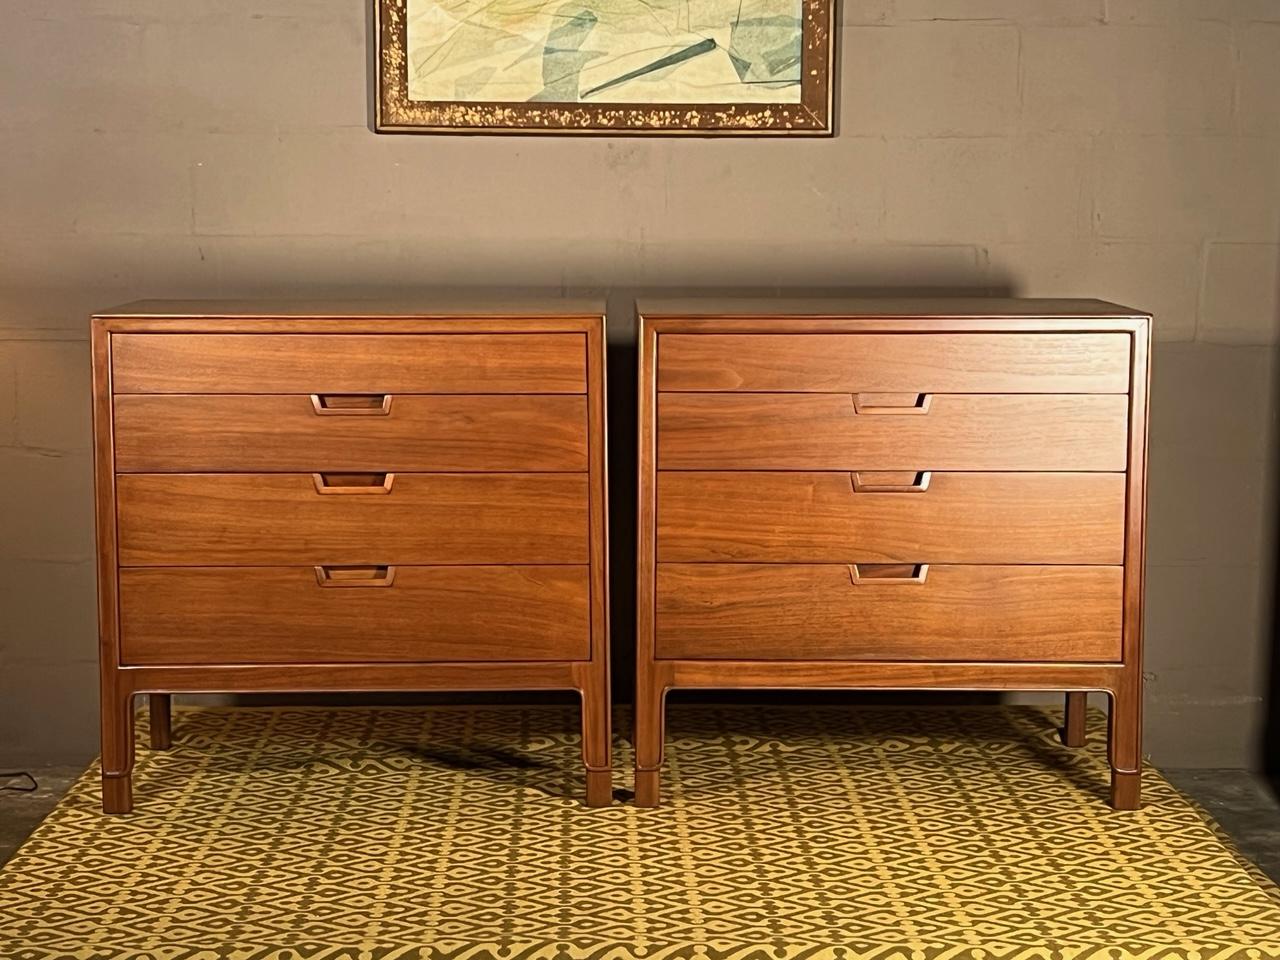 A pair of classic walnut dressers by John Stuart from the 